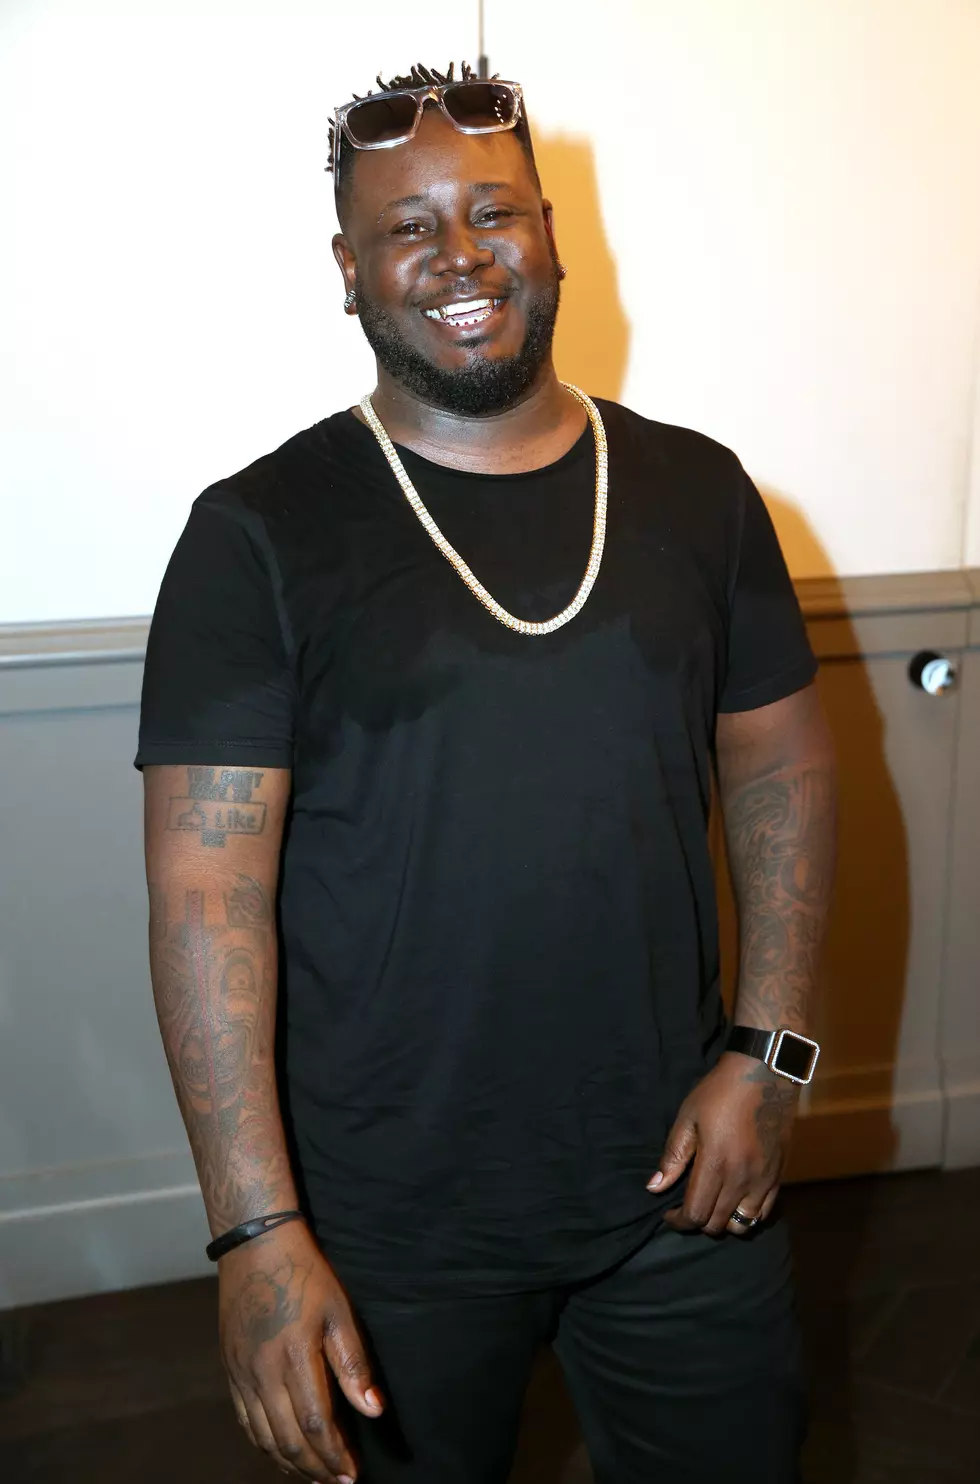 T-Pain Set to Perform in the DakotaDome